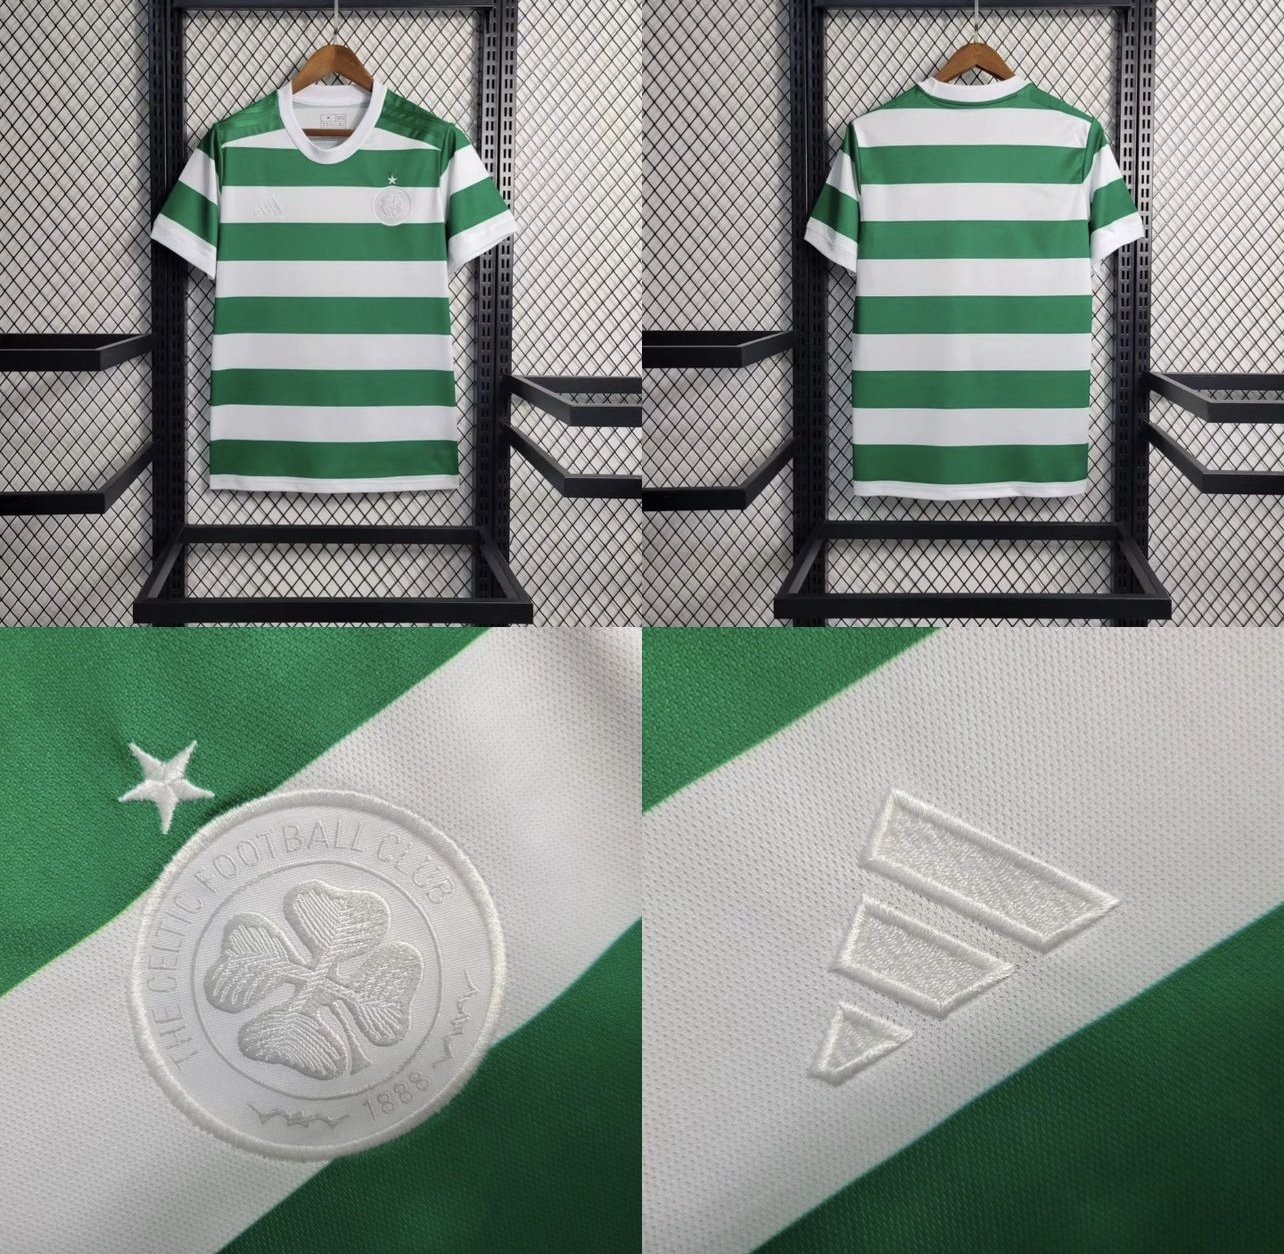 Leaked Ghost Celtic Shirt Will Still Be Released - Sources